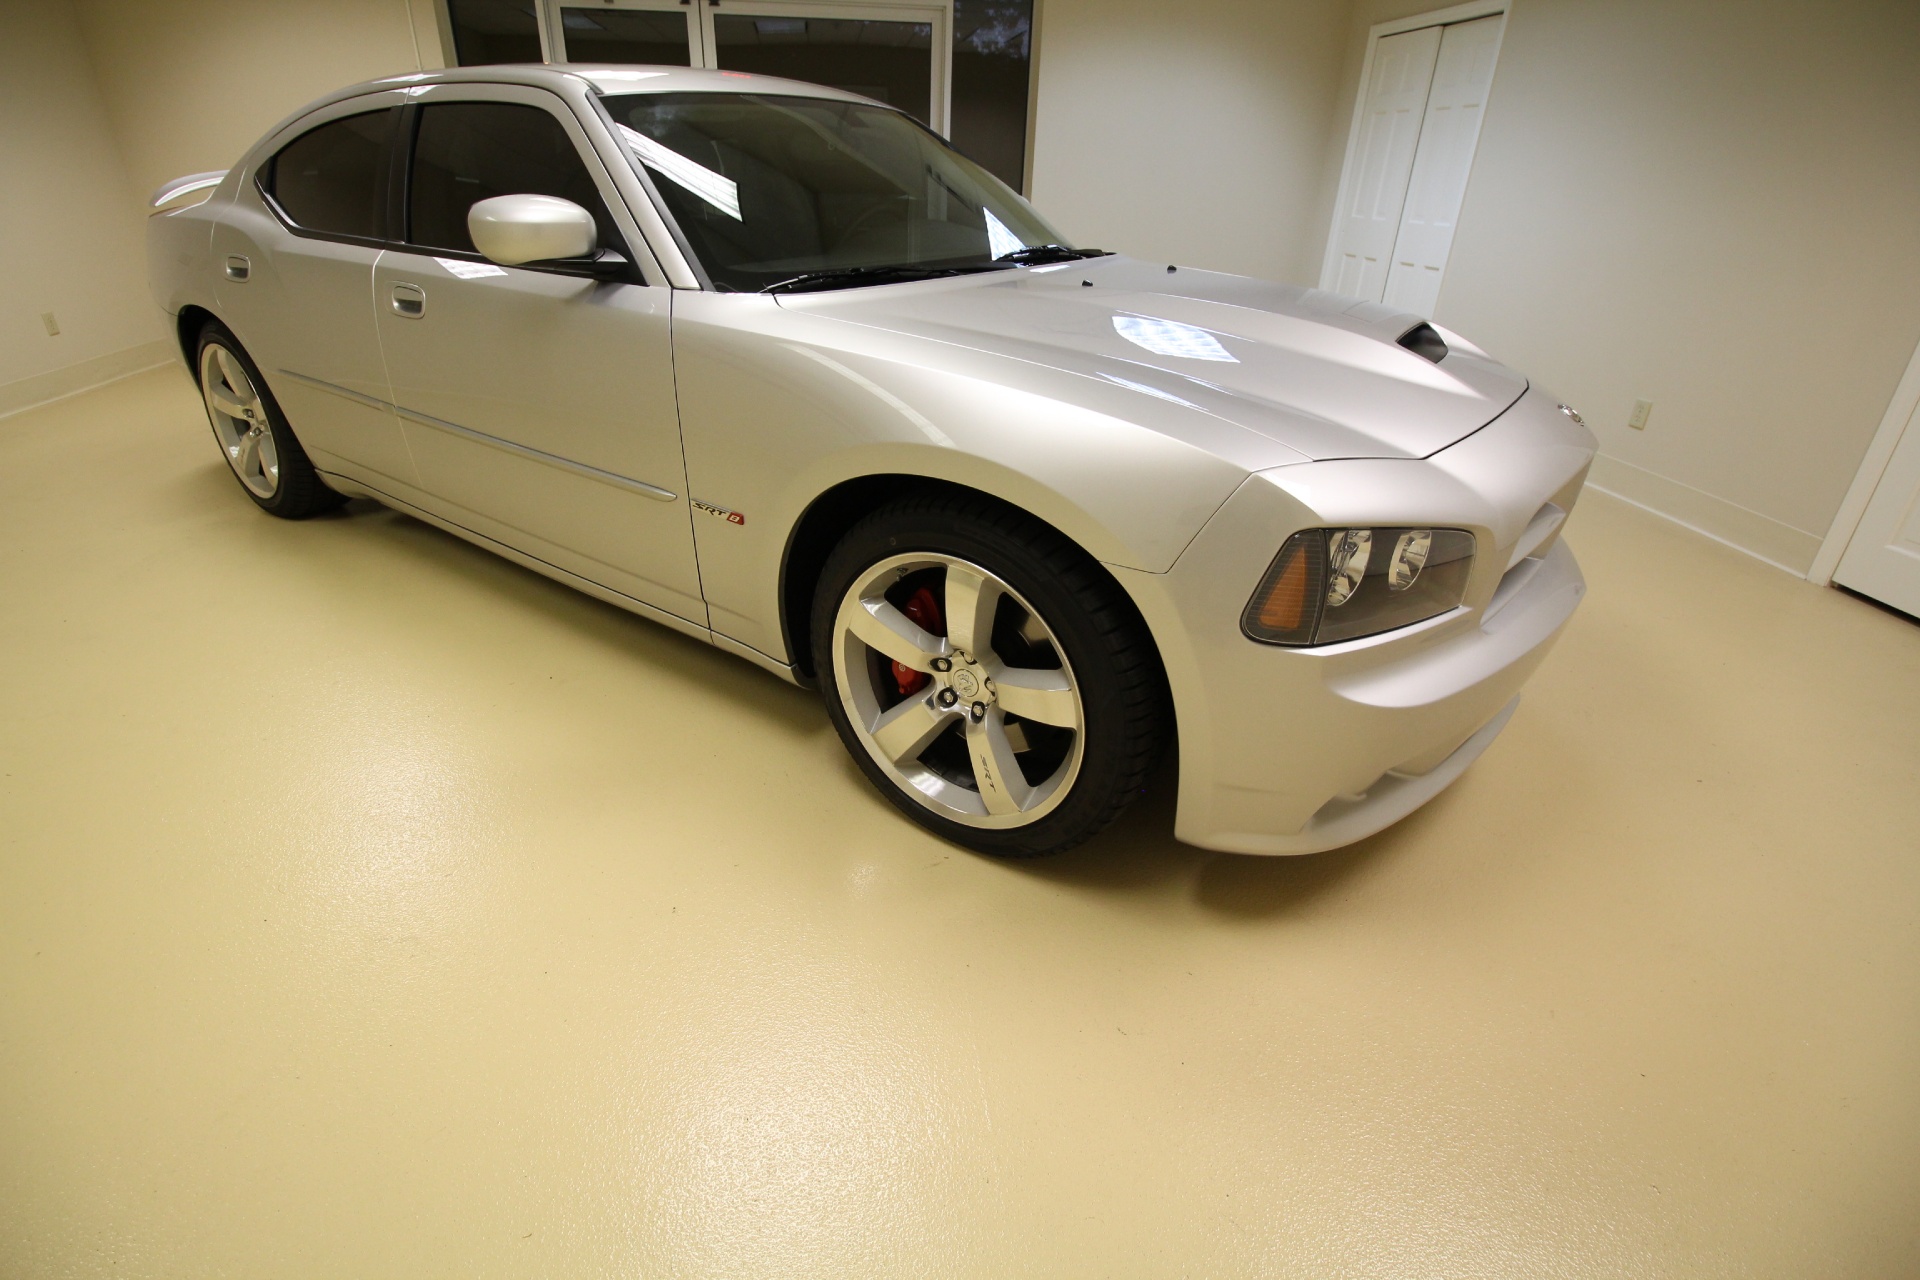 Used 2006 Bright Silver Metallic Clearcoat Dodge Charger SRT-8 SRT-8 LIKE NEW,NO MODS,ALL OPTIONS | Albany, NY